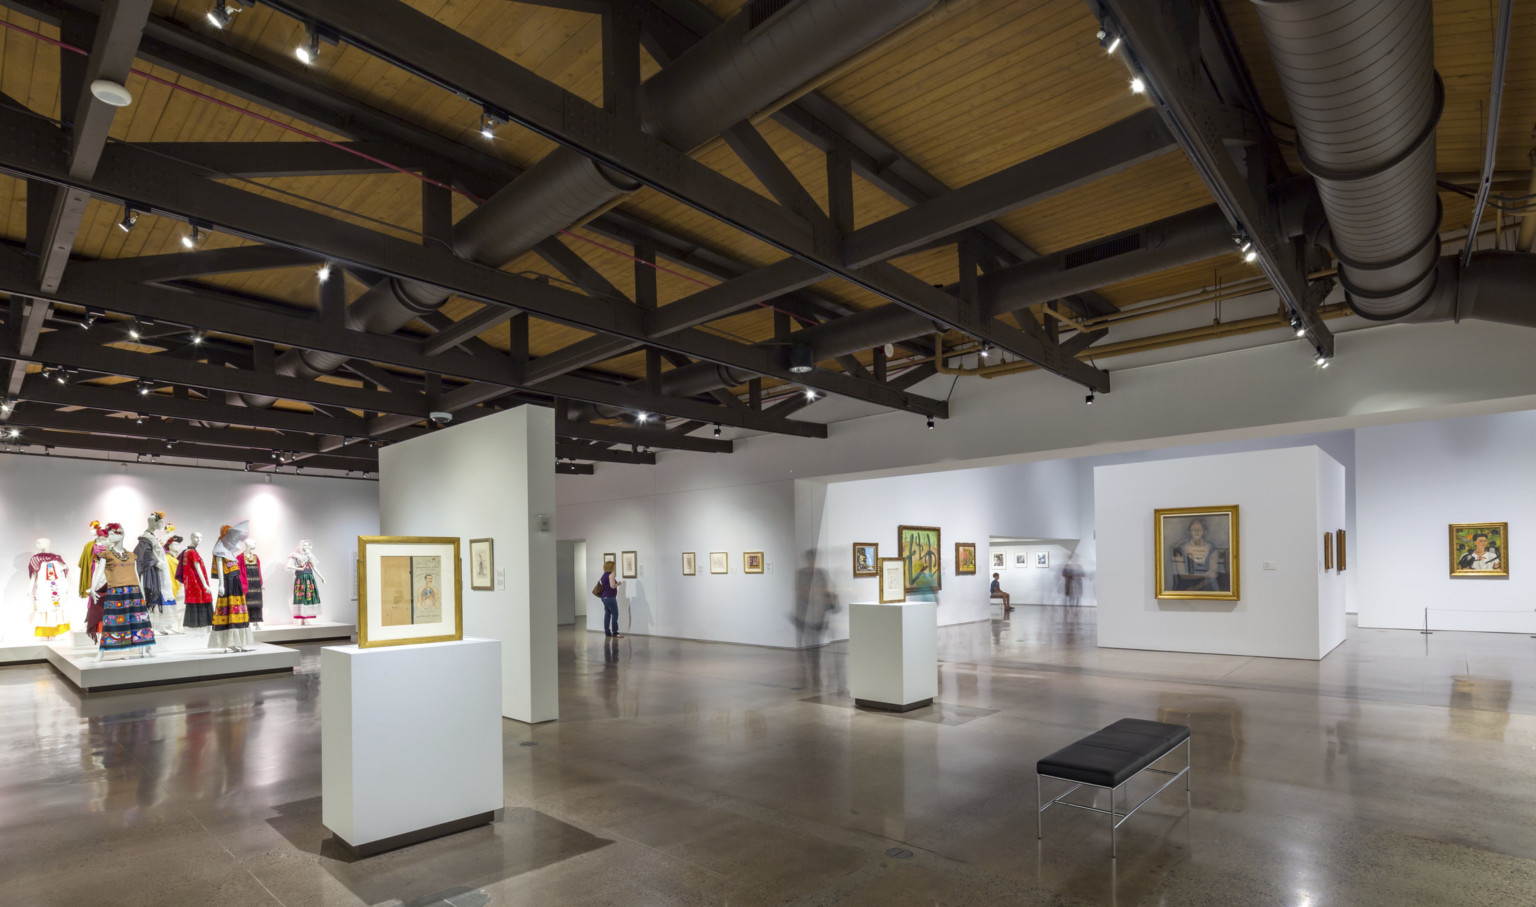 A gallery with paintings and a display of dressed mannequins, under a wood ceiling with exposed black support beams and pipes